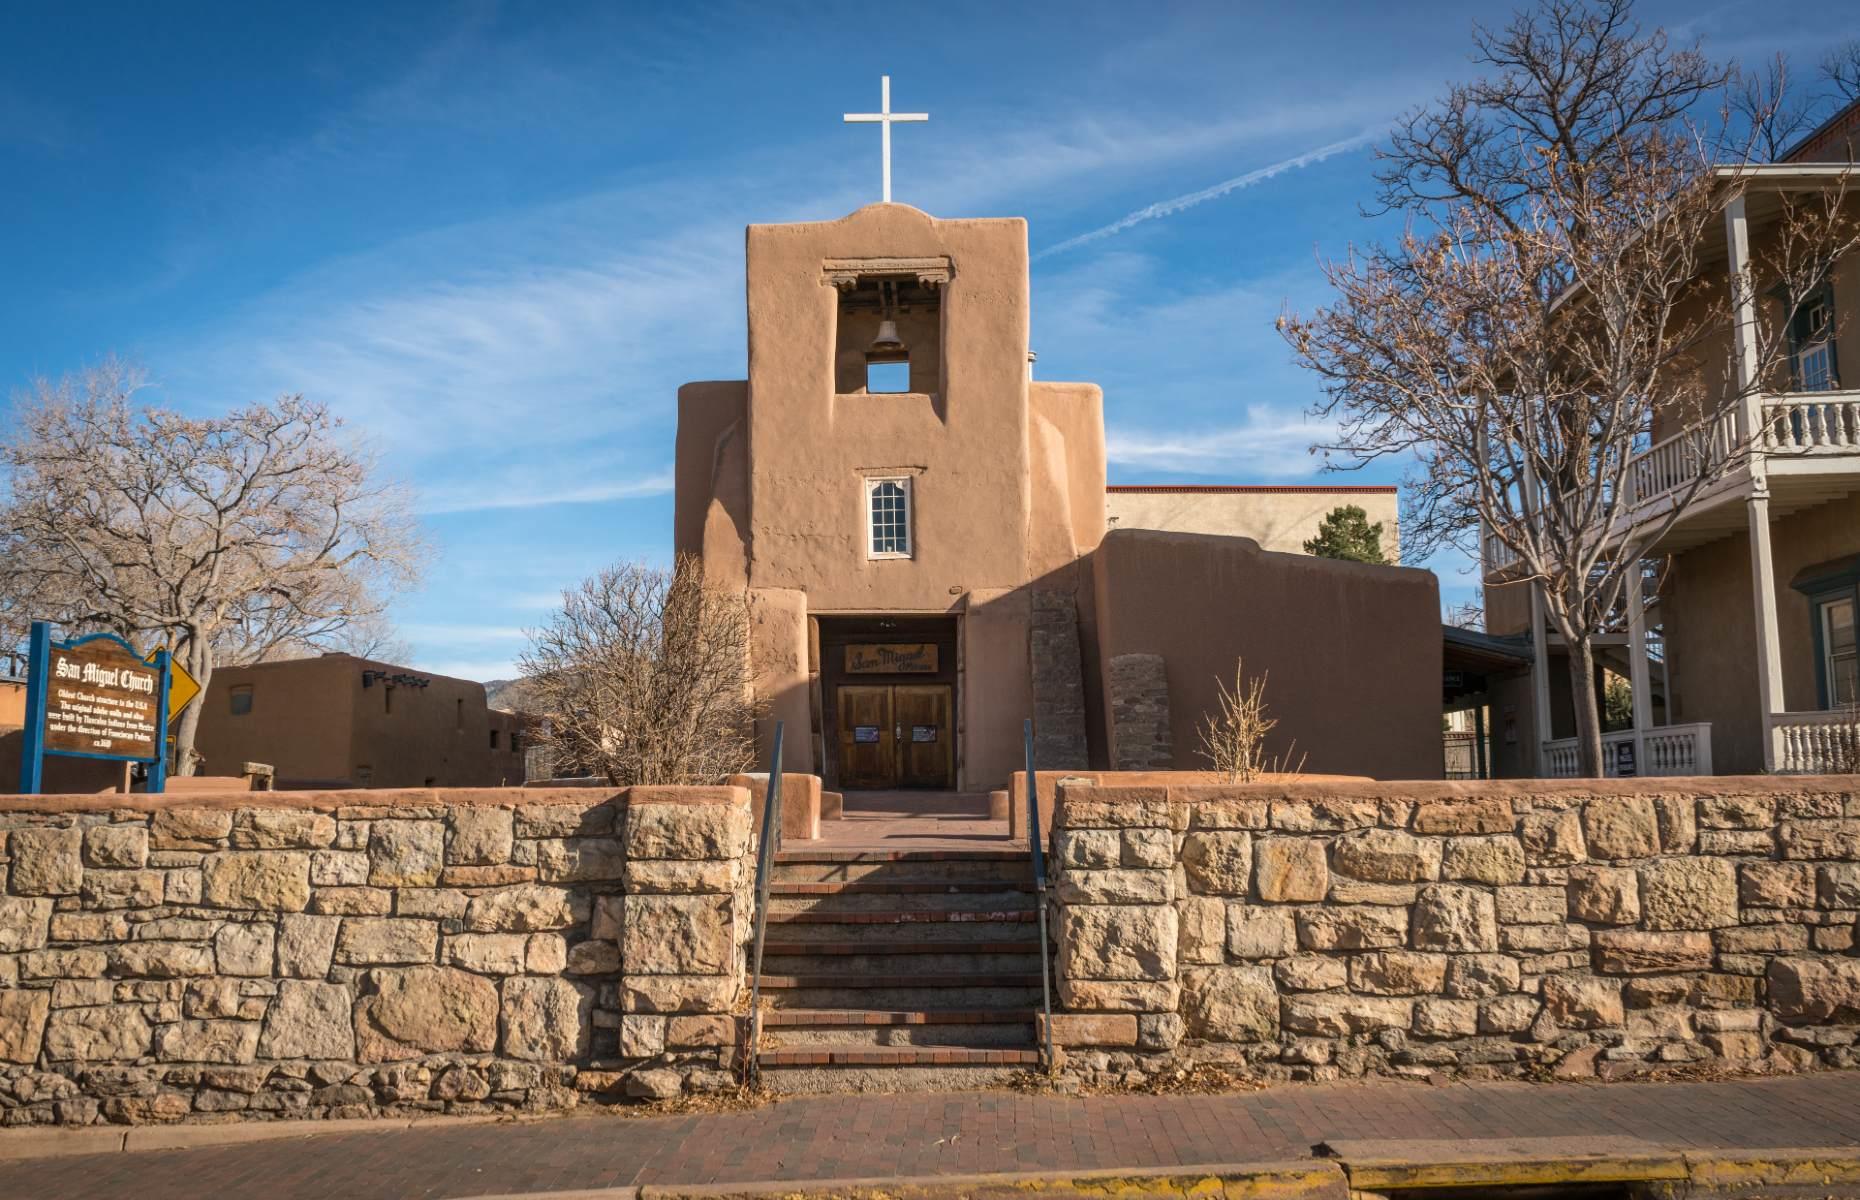 There are plenty more historic churches to explore along the rest of the route, including the 225-year-old San Jose de Gracia in Las Trampas, San Antonio de Padua in the wood carving village of Cordova and San Miguel Chapel (the oldest chapel in the US, pictured) in Santa Fe. As you finish your drive at this storied city, be sure to check out some of its world-class galleries and museums before heading home.